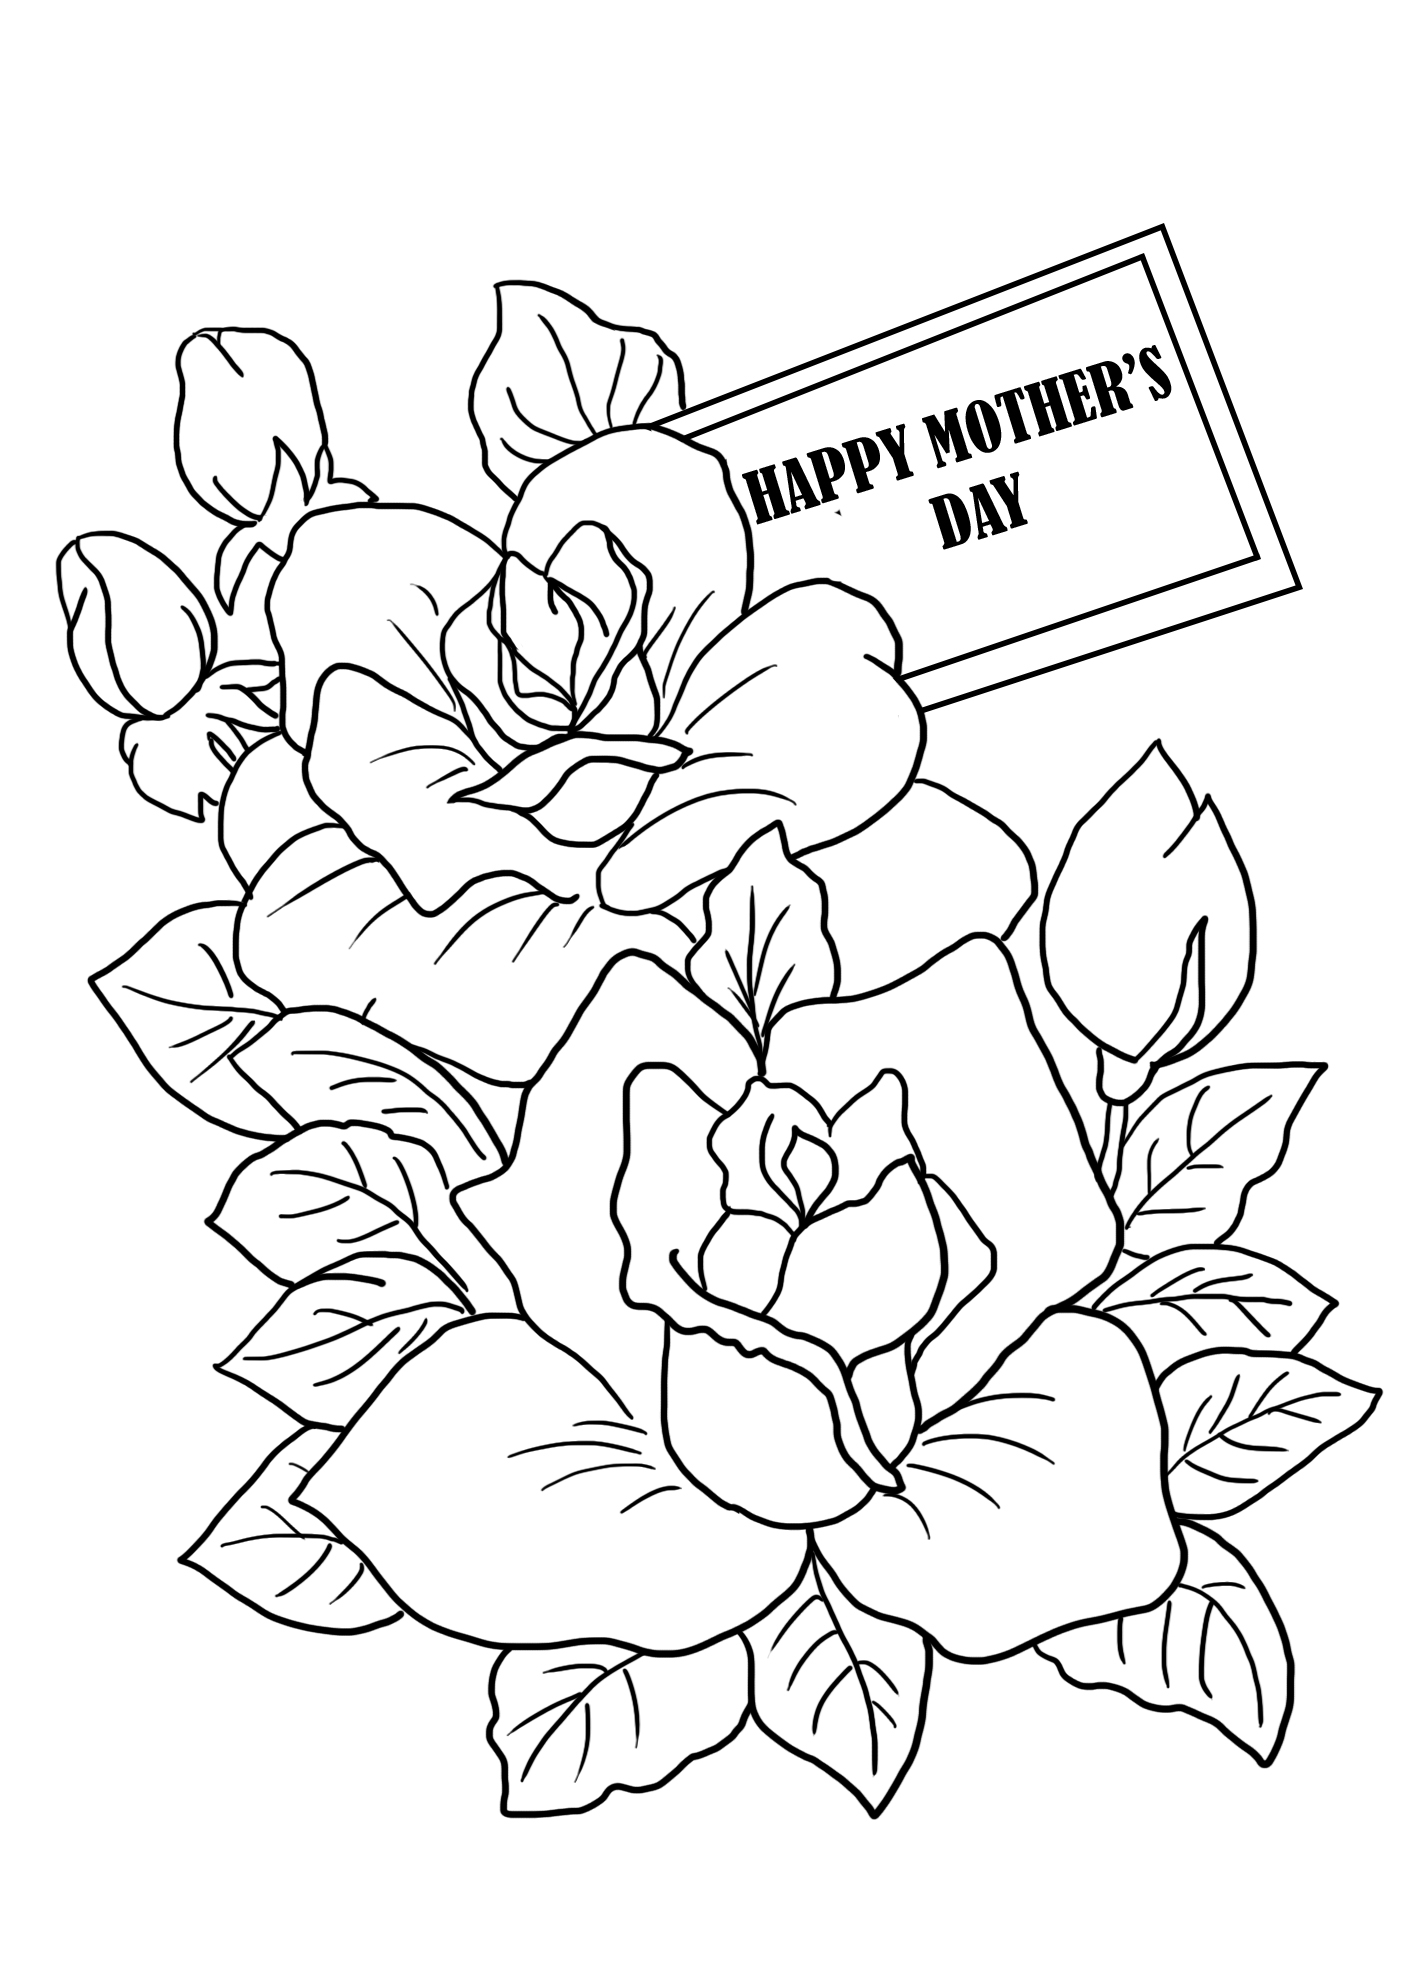 soulmetalpodcast-flowers-for-mothers-day-coloring-sheet